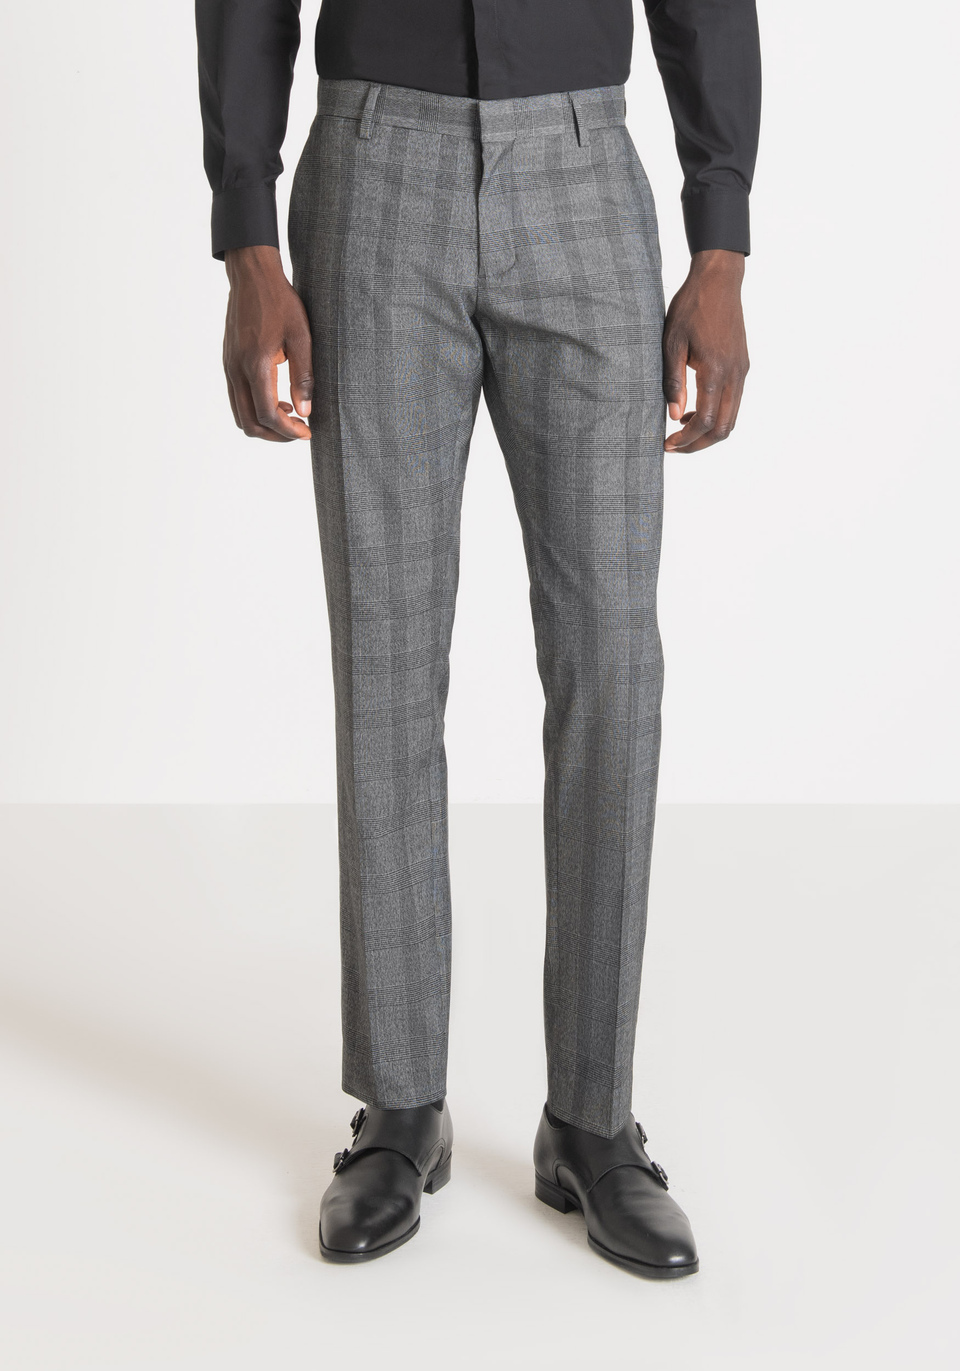 "BONNIE" SLIM FIT TROUSERS IN STRETCH FABRIC WITH PRINCE OF WALES PATTERN - Antony Morato Online Shop